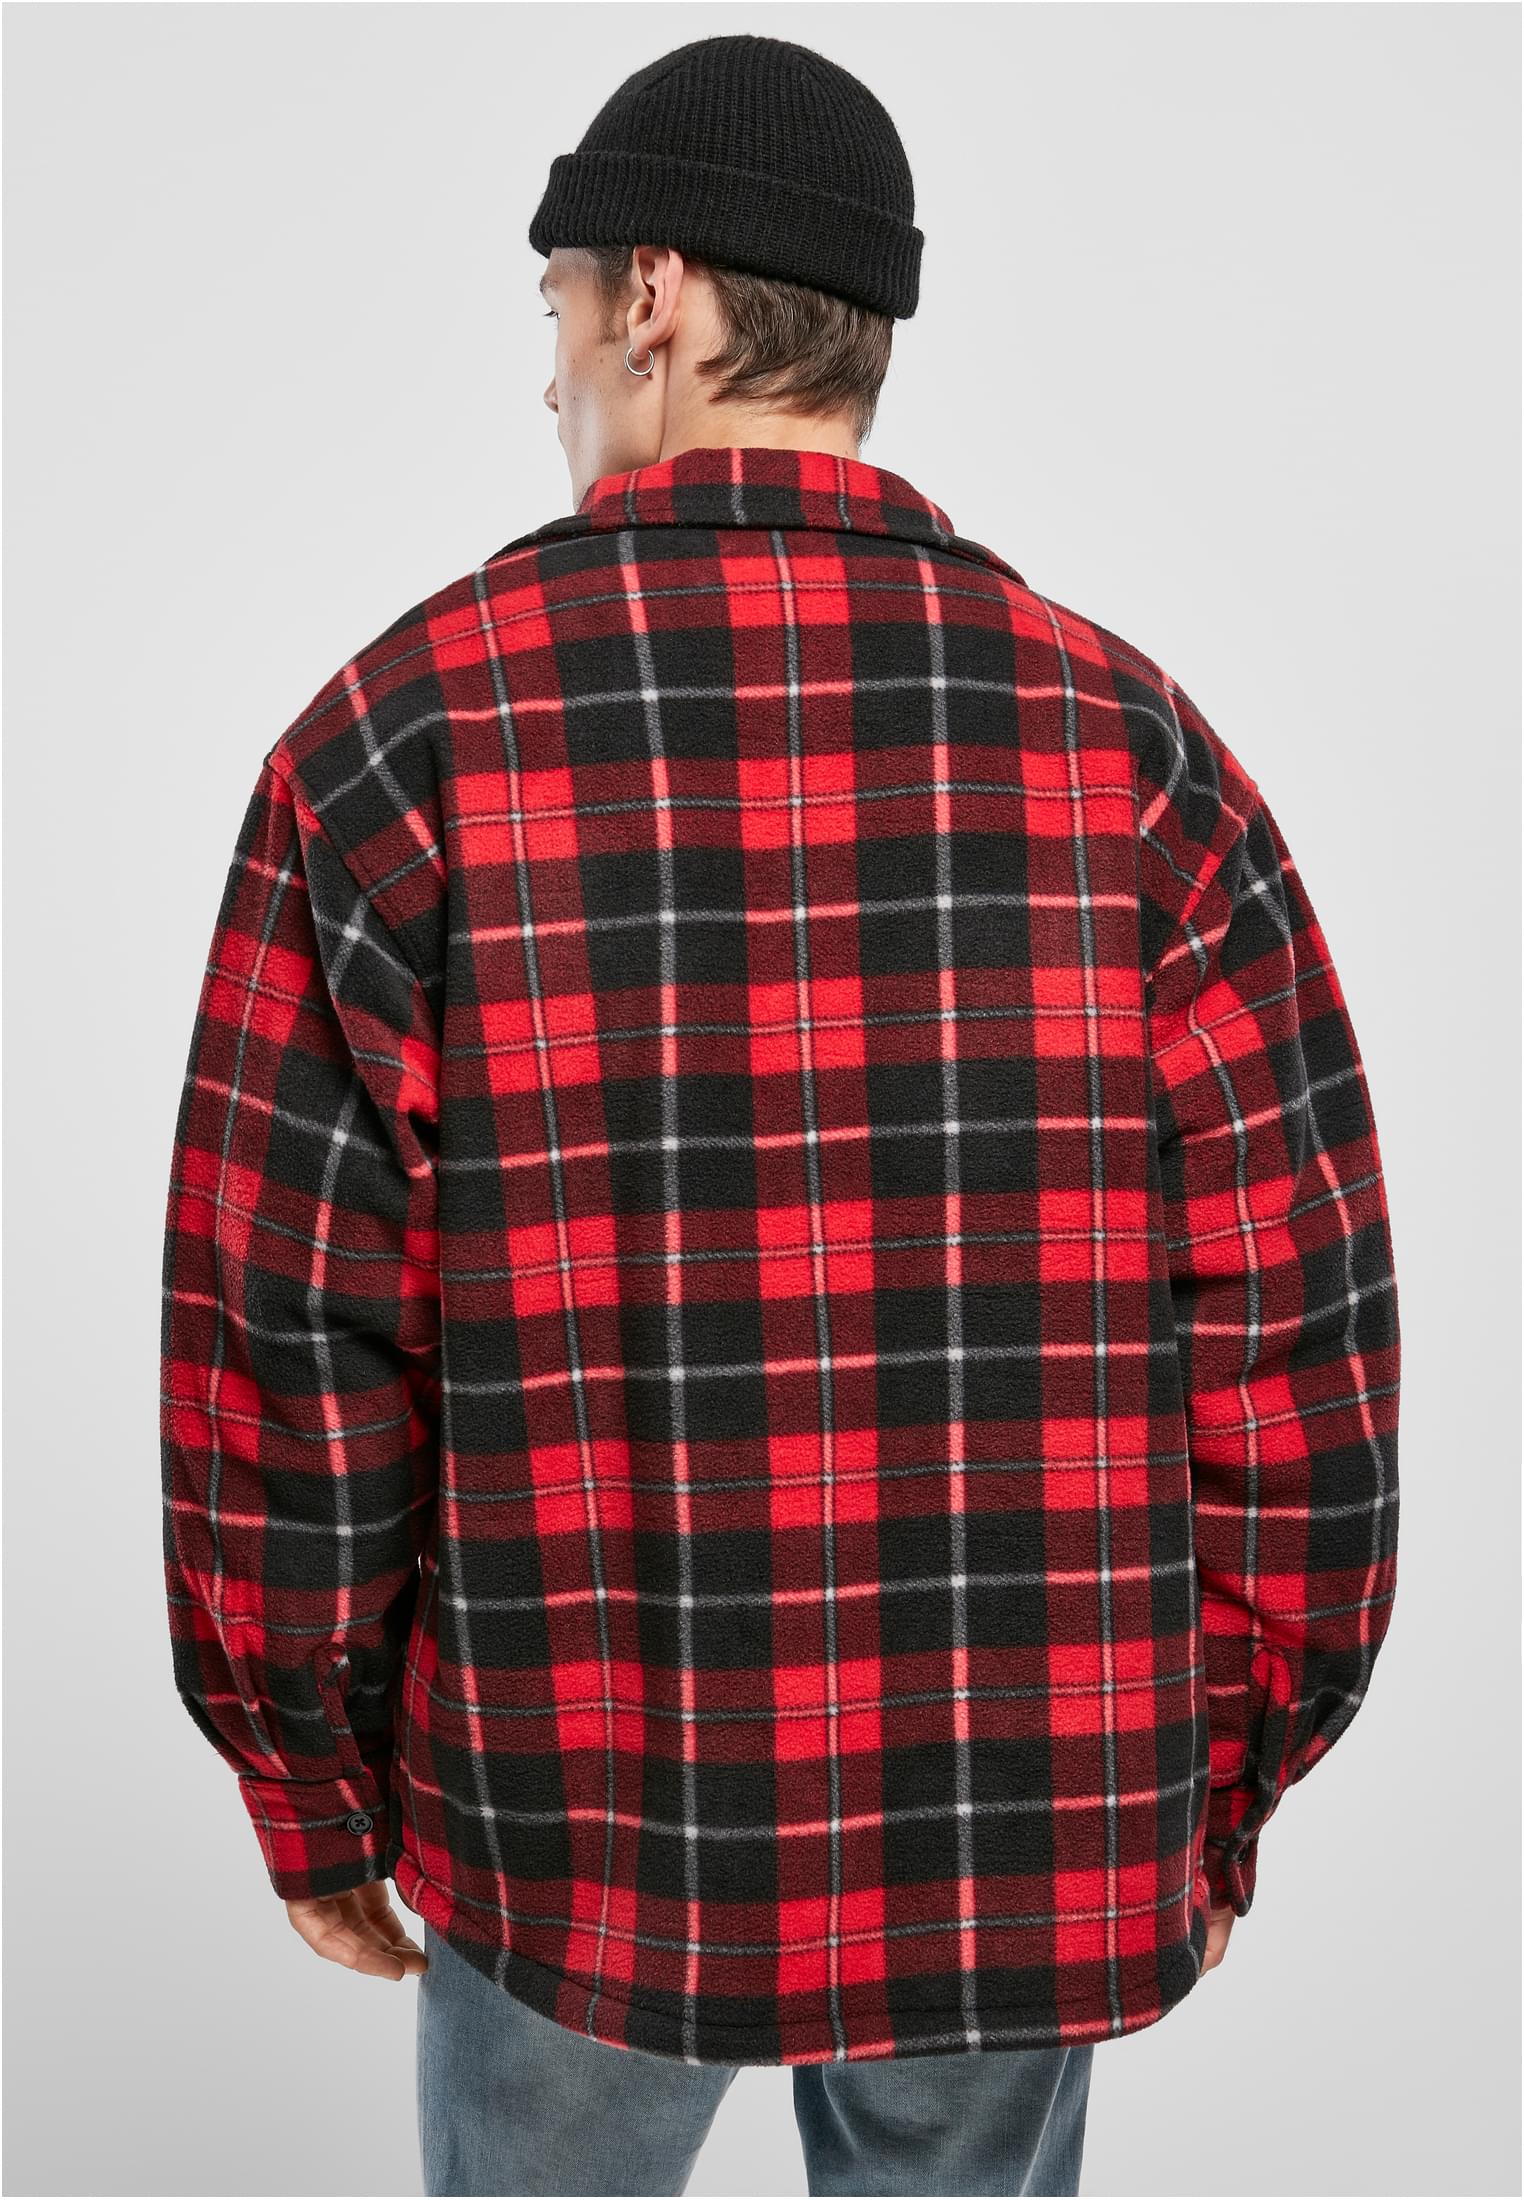 Hemden Plaid Teddy Lined Shirt Jacket in Farbe red/black